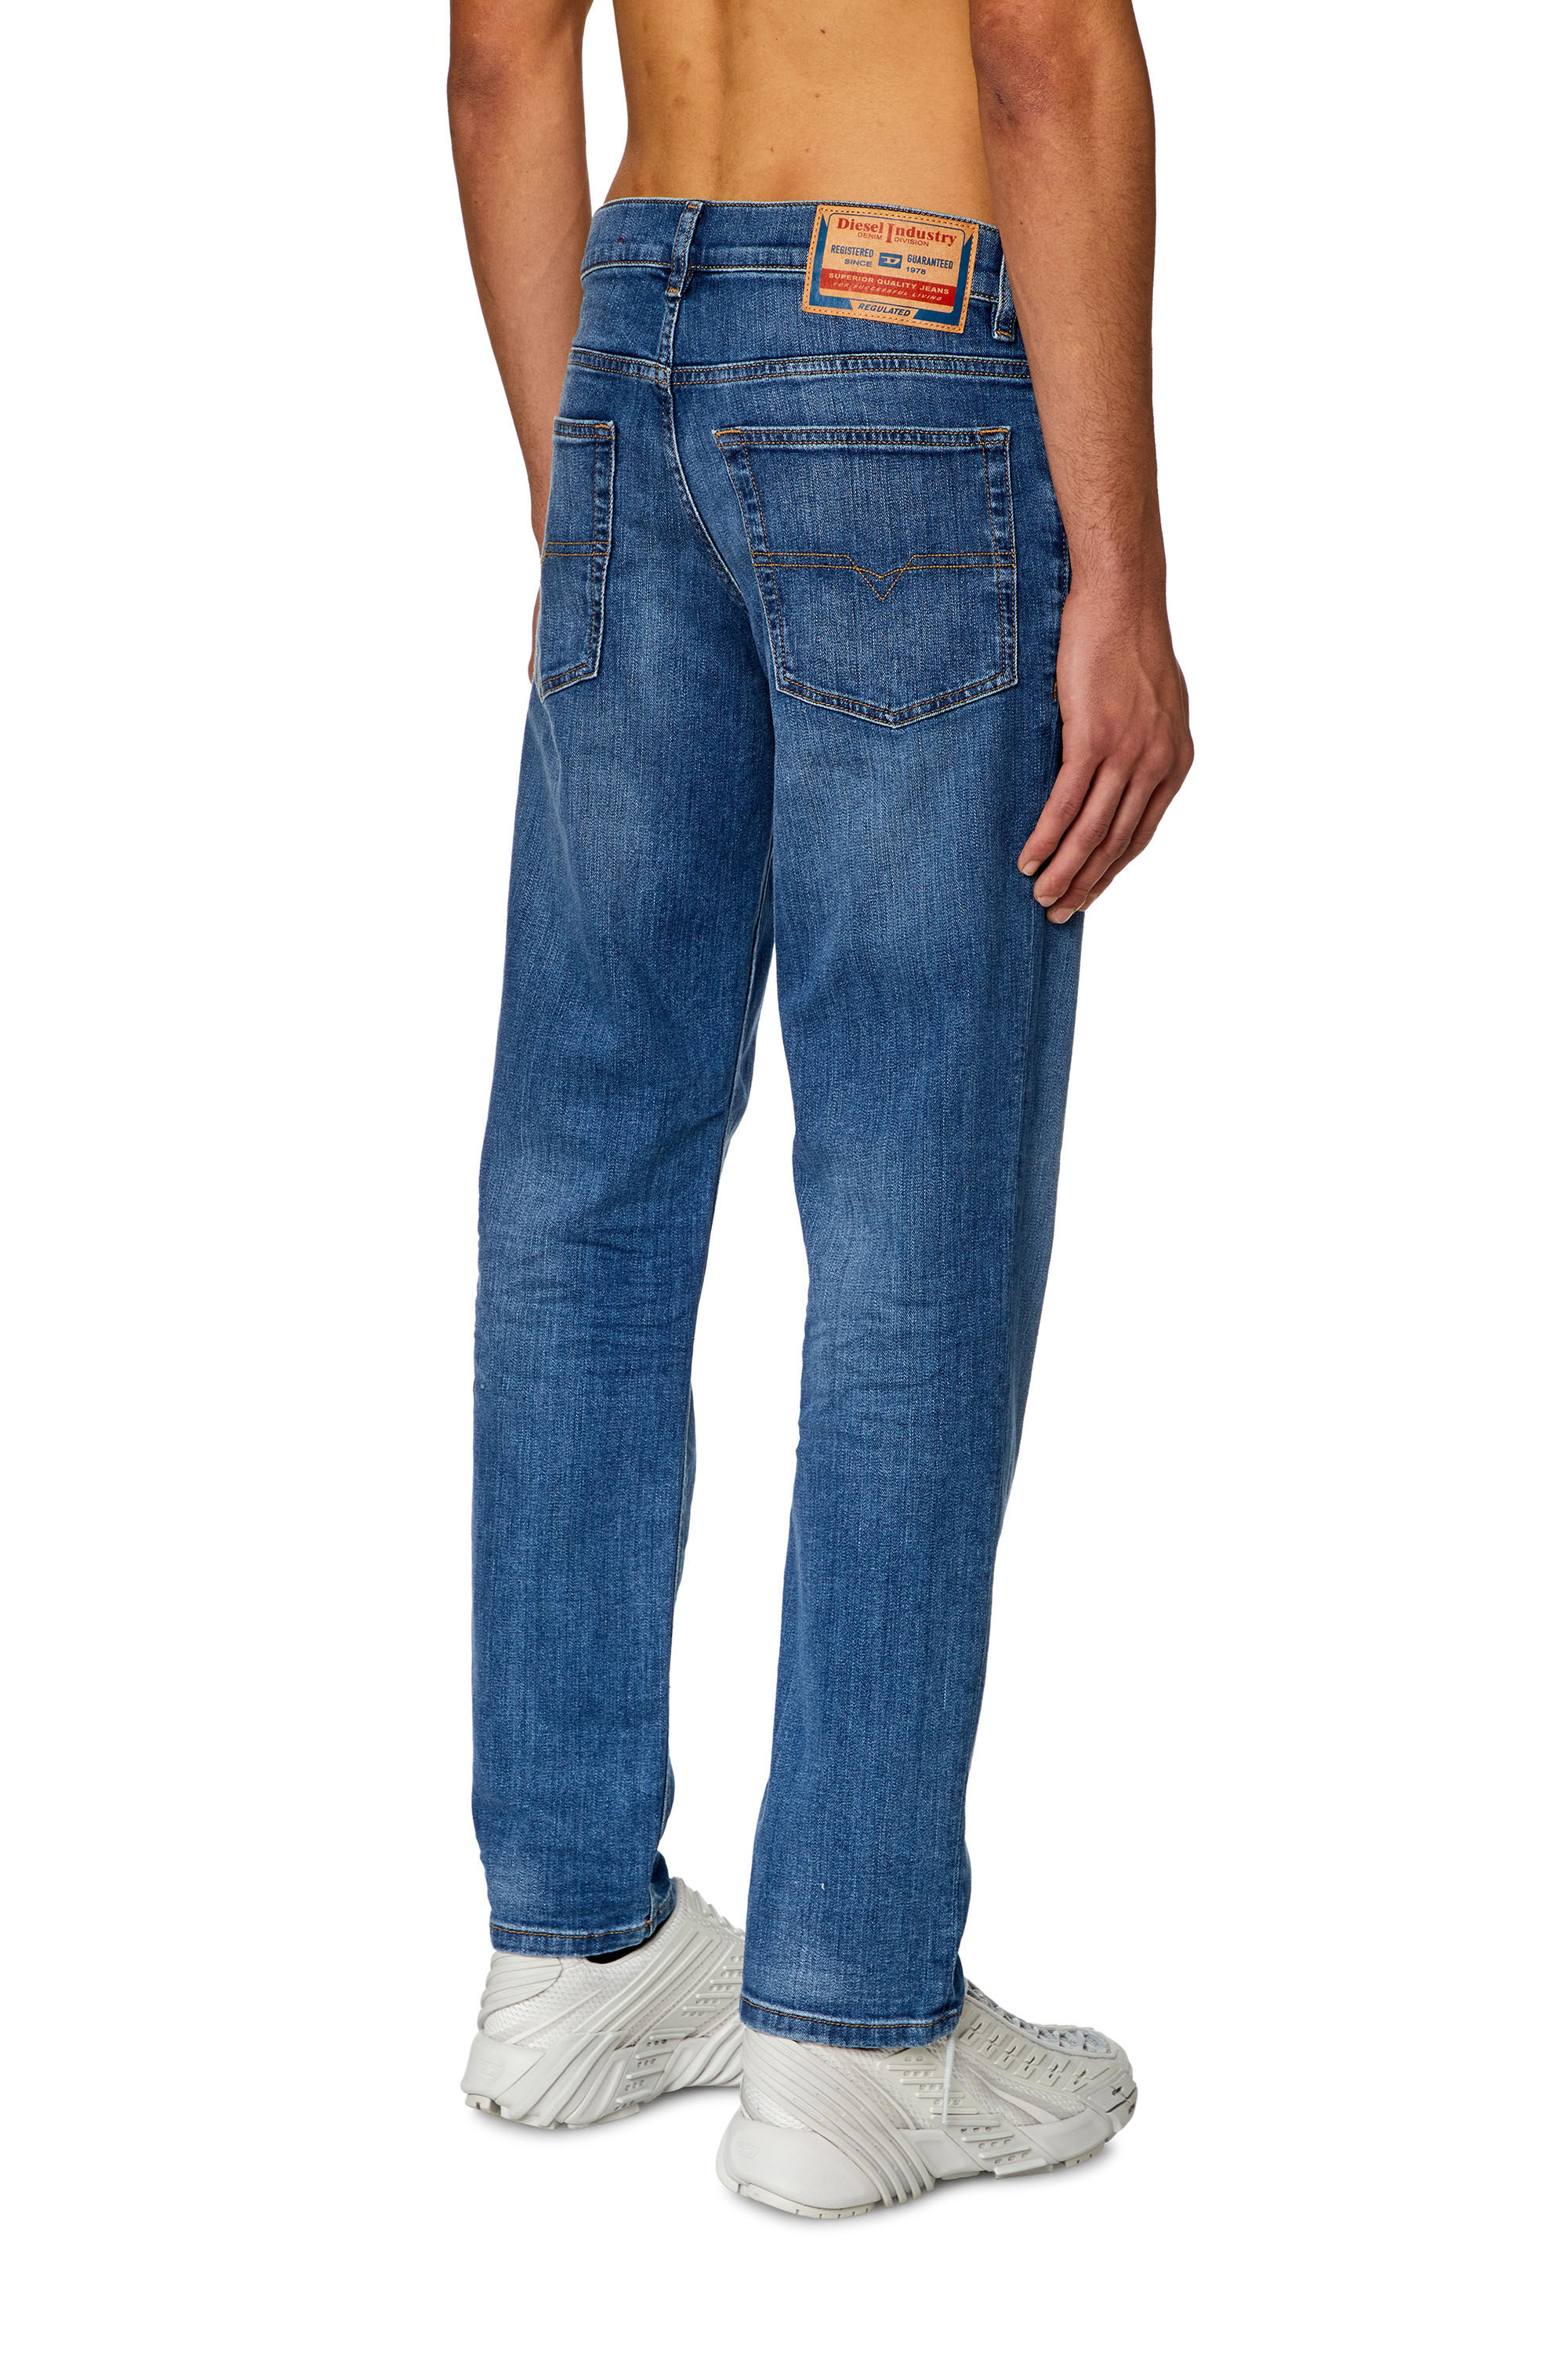 Diesel - Tapered Jeans 2023 D-Finitive 0KIAL, Hombre Tapered Jeans - 2023 D-Finitive in Azul marino - Image 3